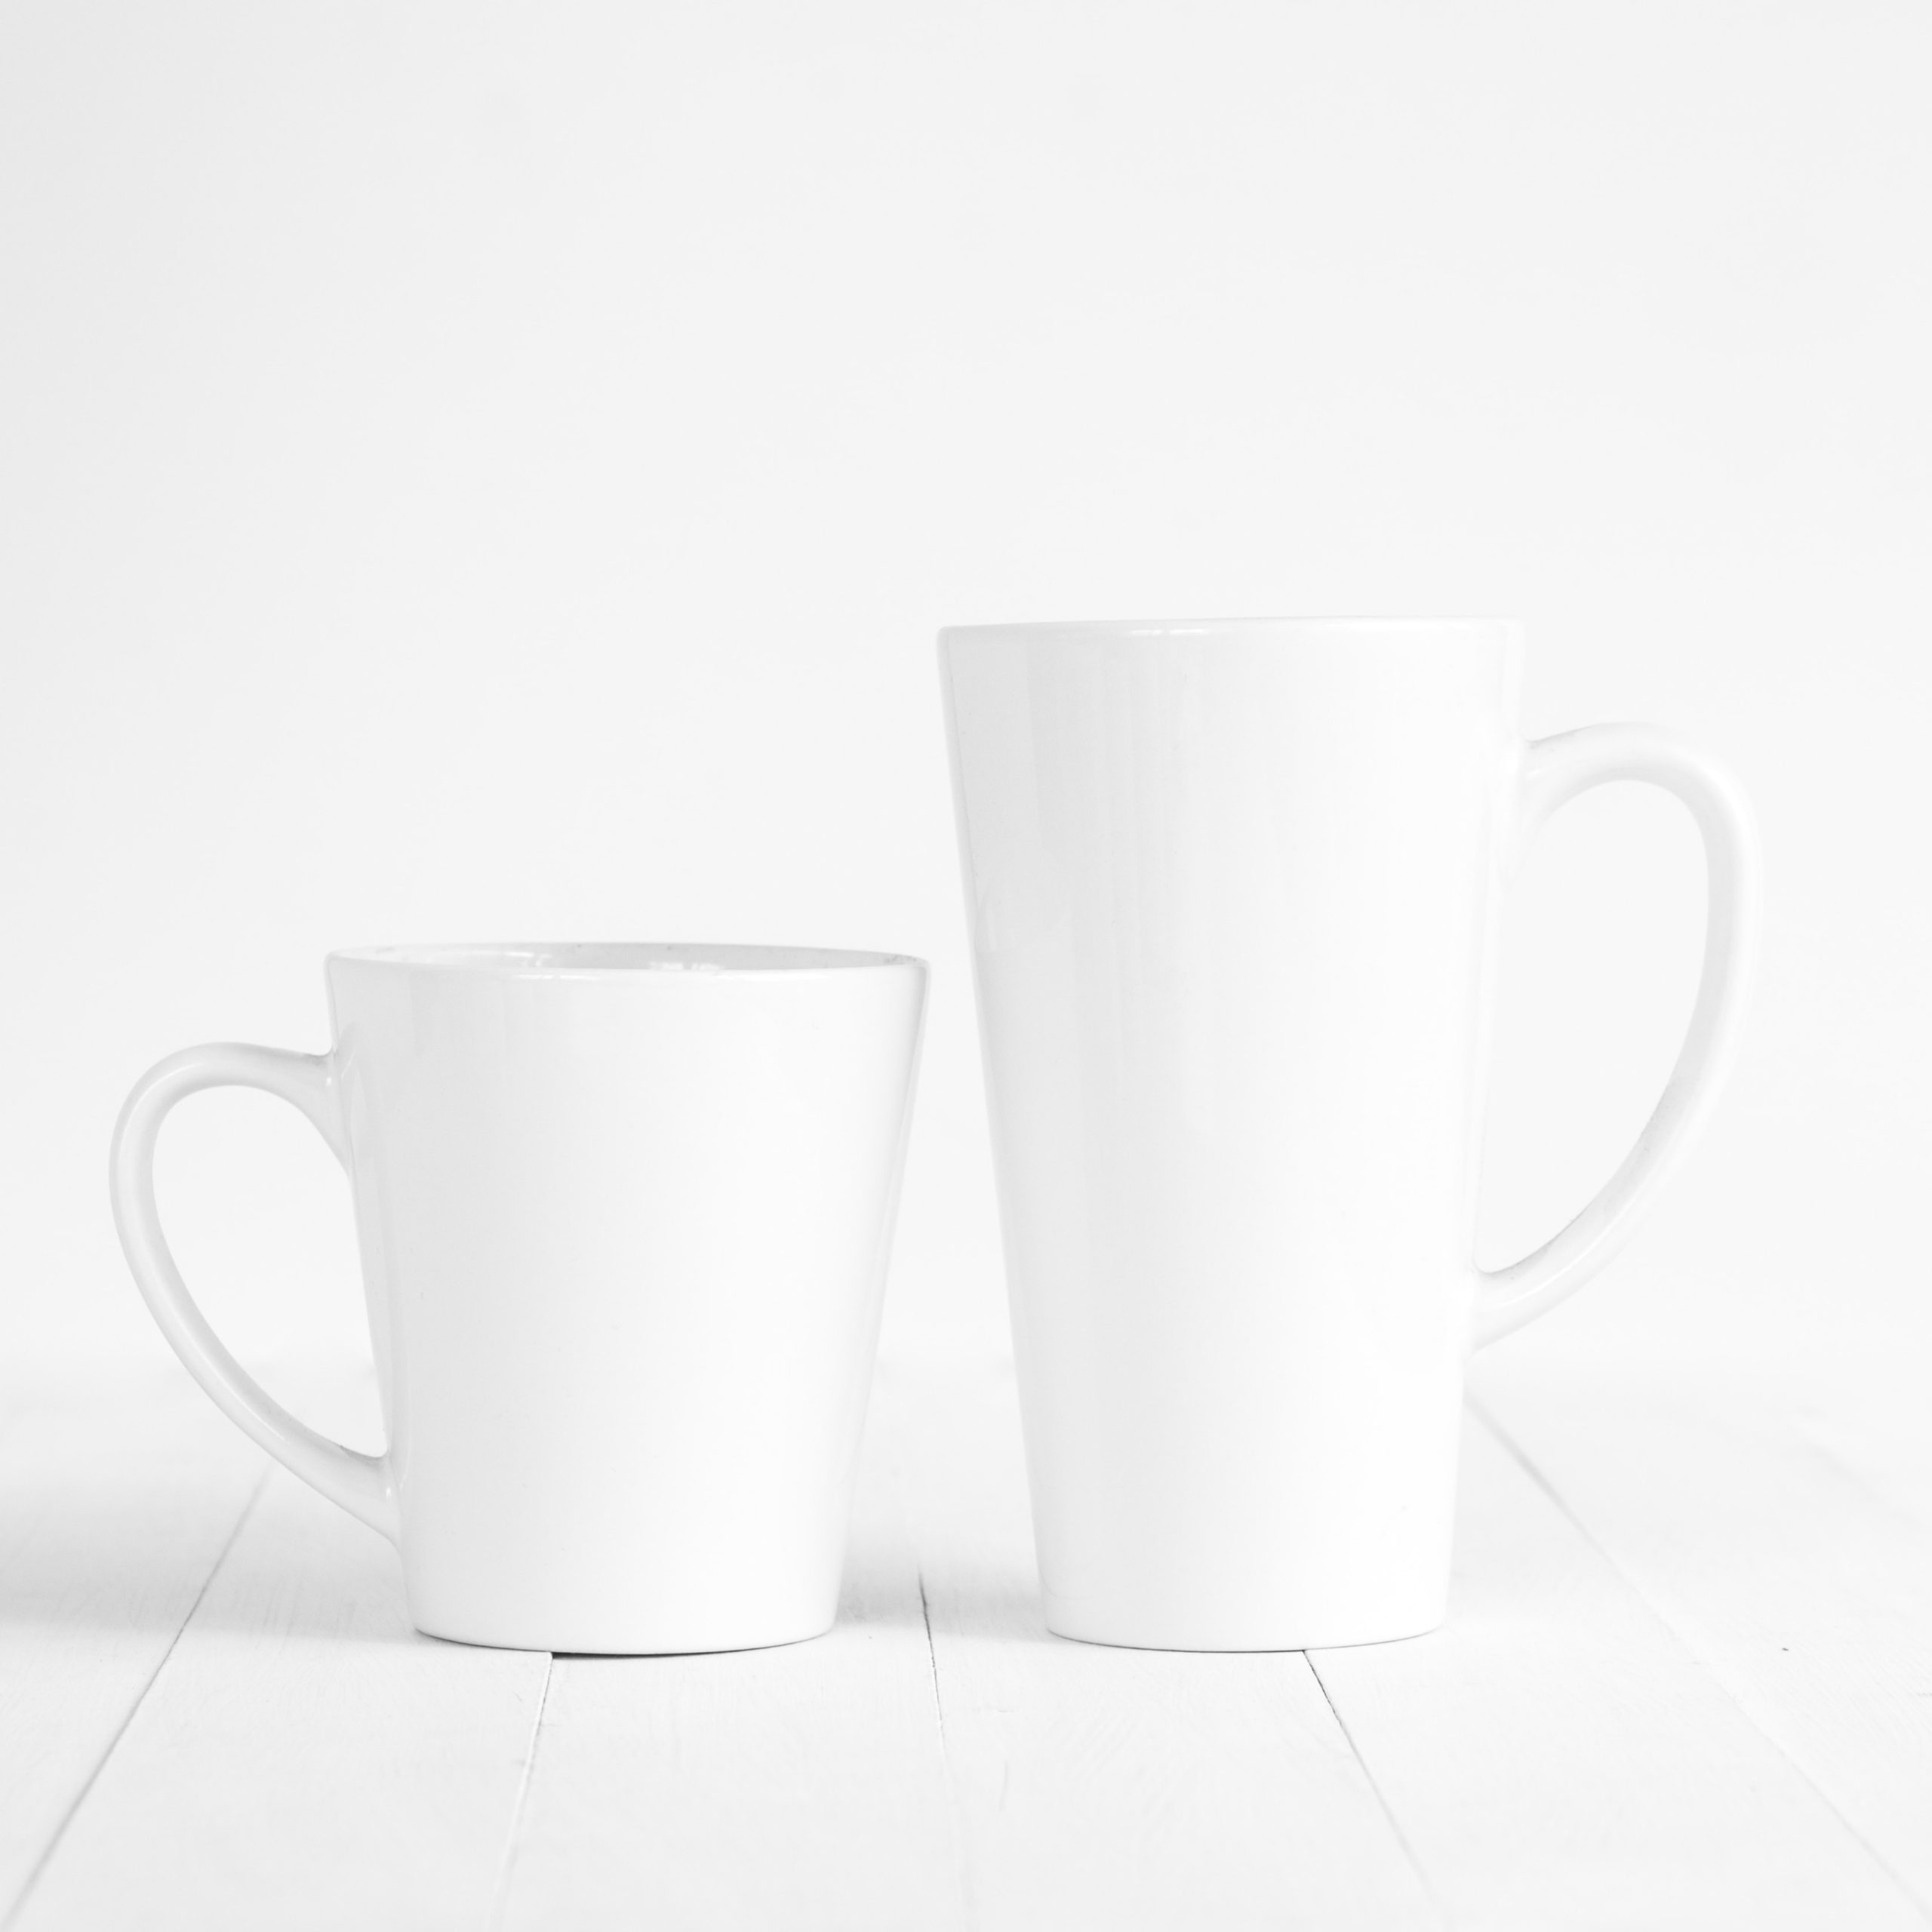 2 white coffee mugs sitting side by side. One is taller than the other | The comparison trap | Comparison is the thief of joy | Positively Jane